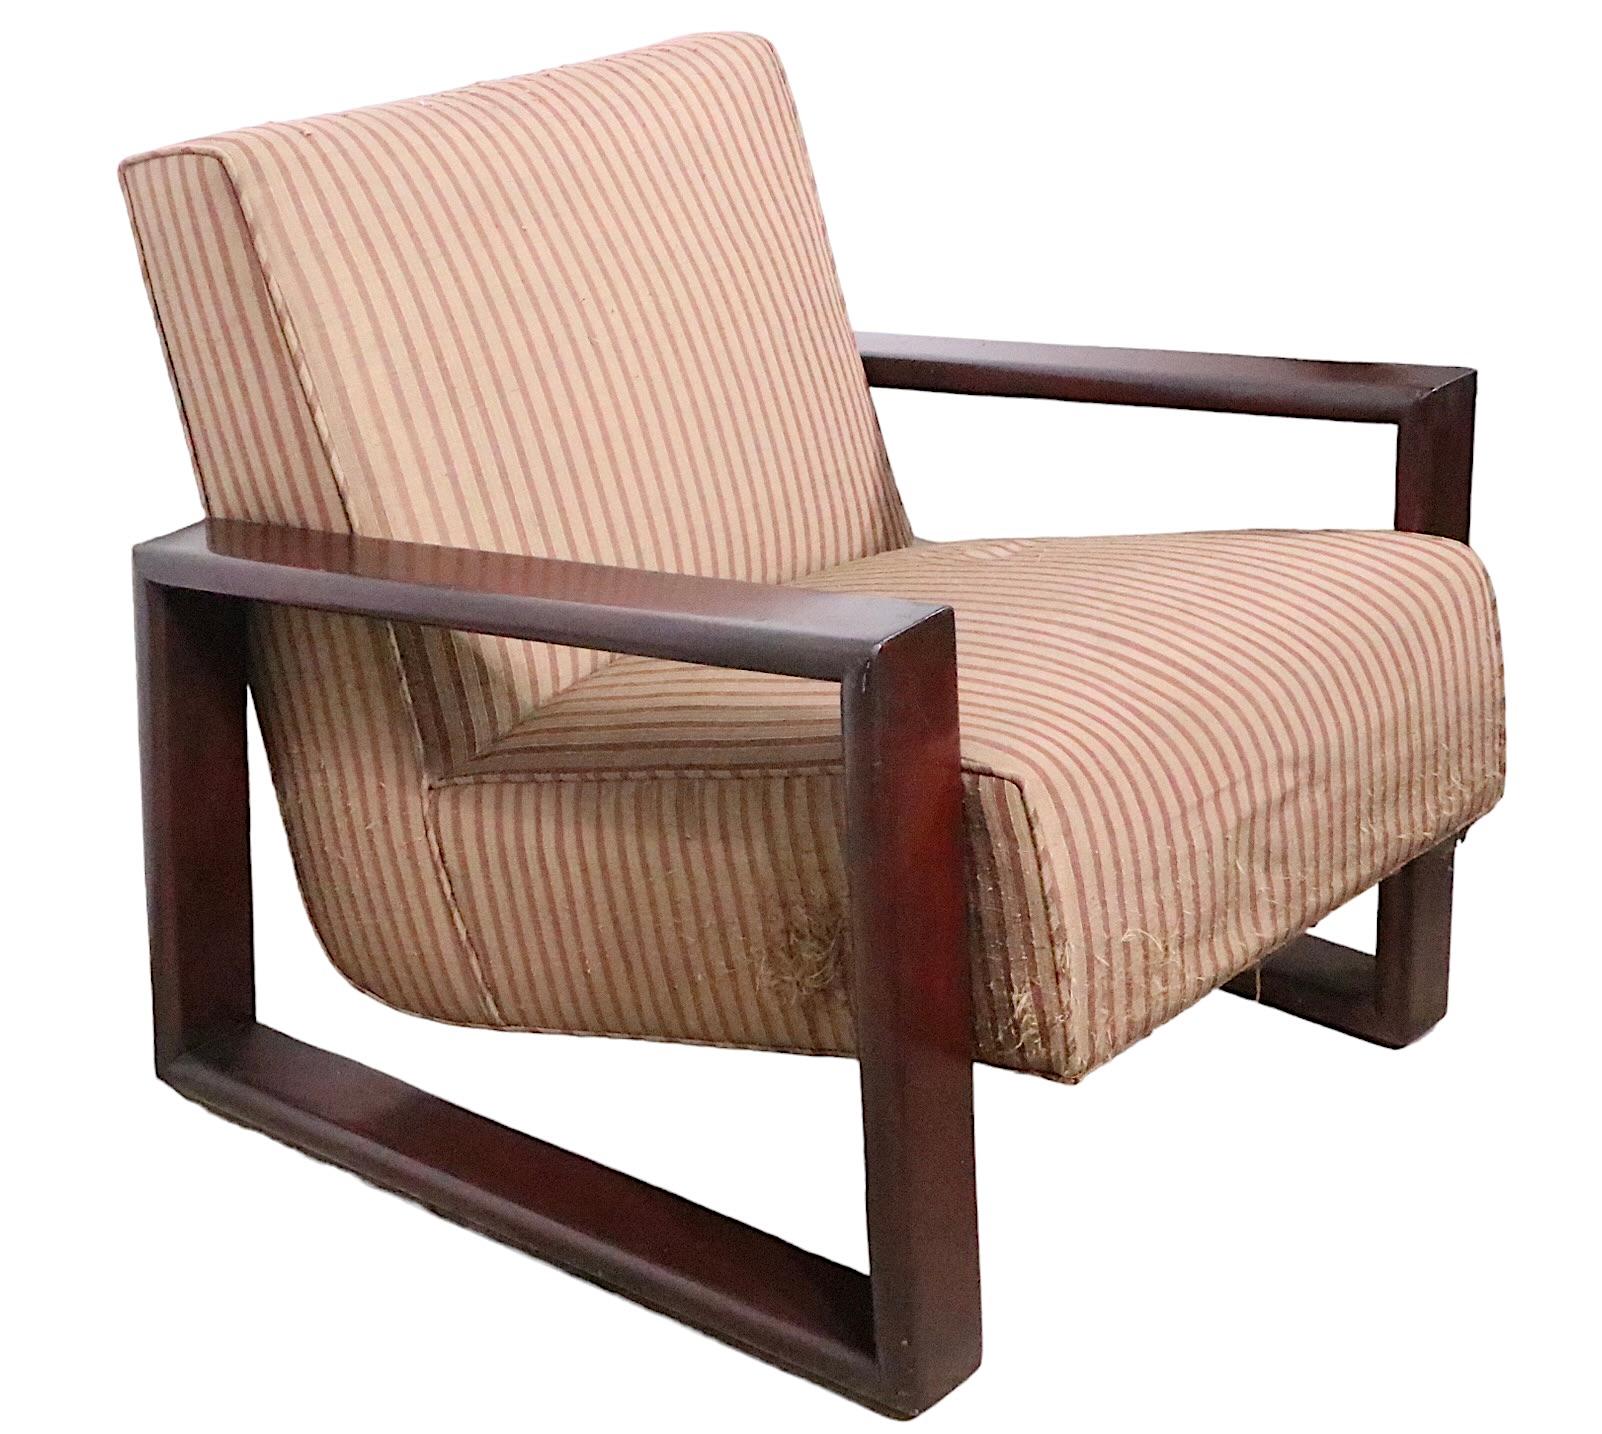 Pair of high style lounge chairs, with an architectural  continuous open arm and leg structure, which supports the upholstered seat and back. The chairs are structurally sound and sturdy, both will need to be refinished, and reupholstered. 
